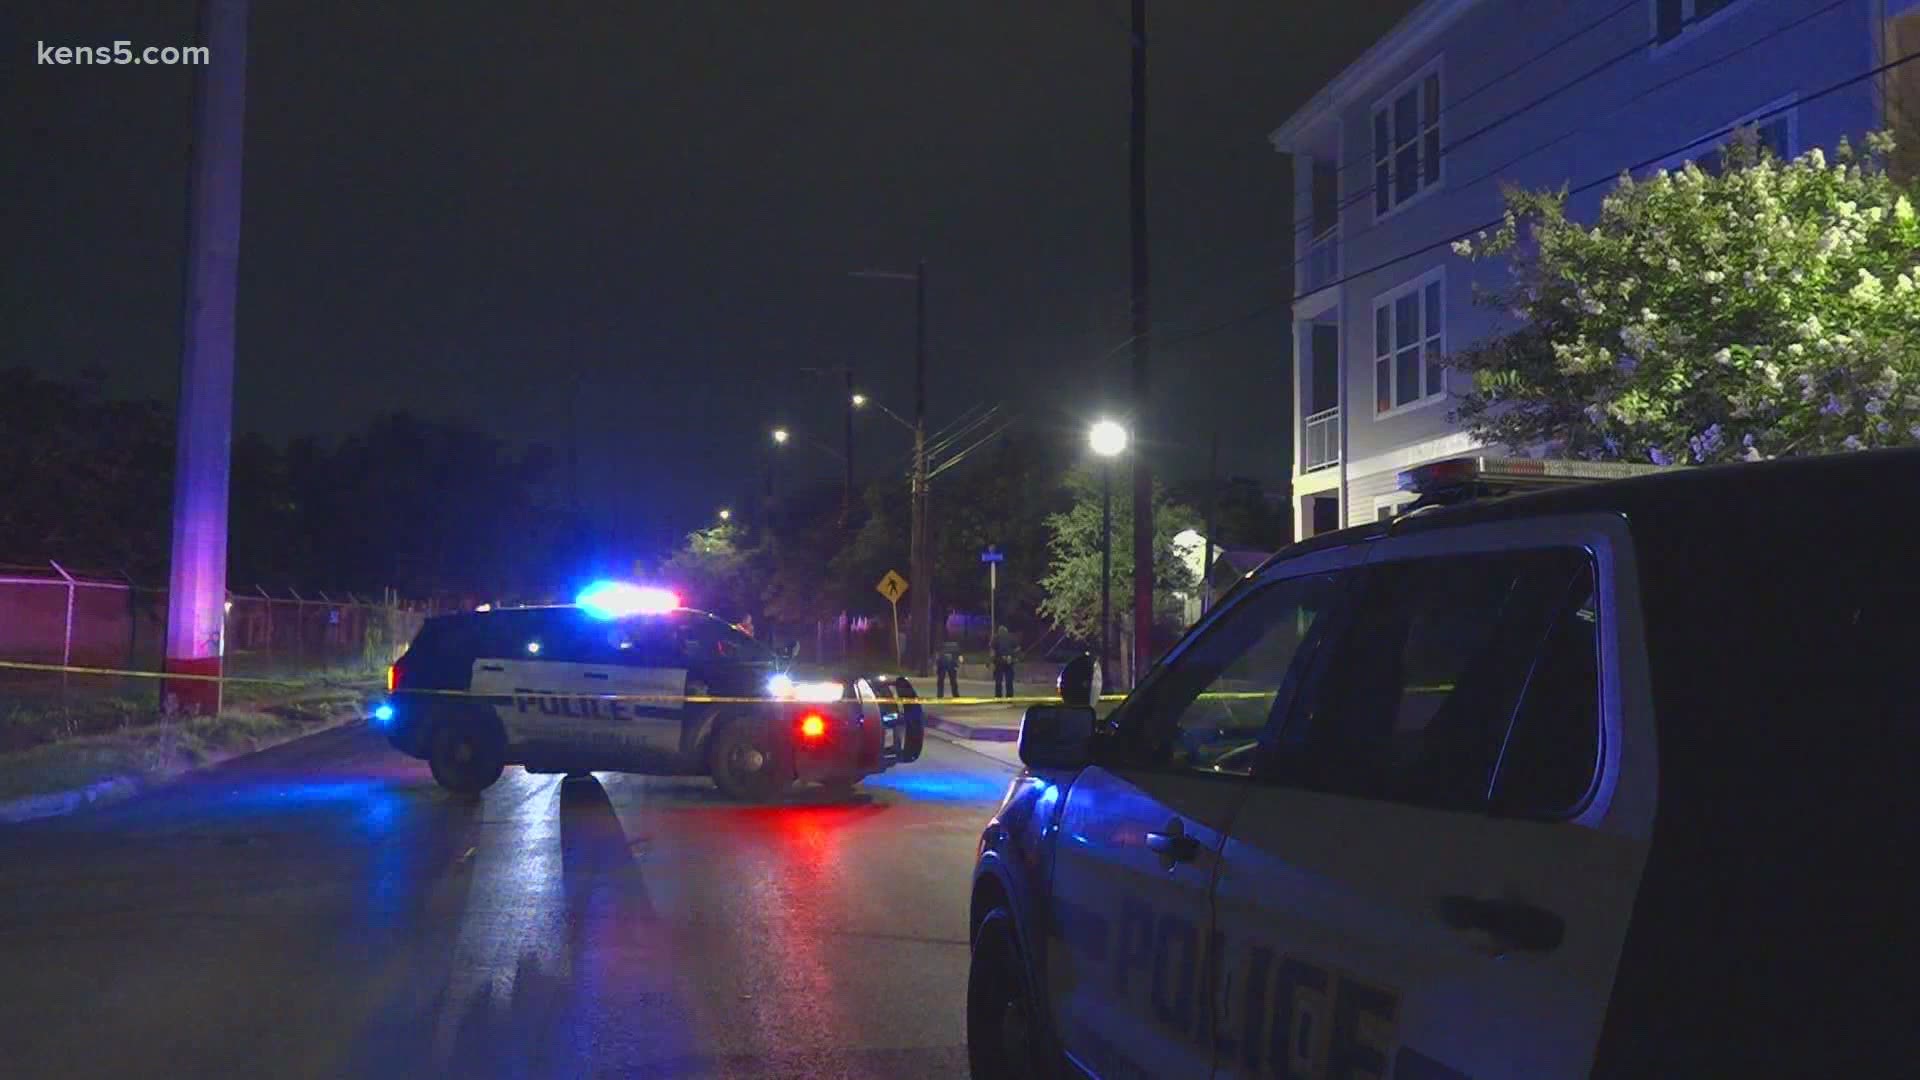 A mystery unfolded late Wednesday night after police say they found evidence of a shooting but no victim. A man who was shot later walked into a nearby hospital.